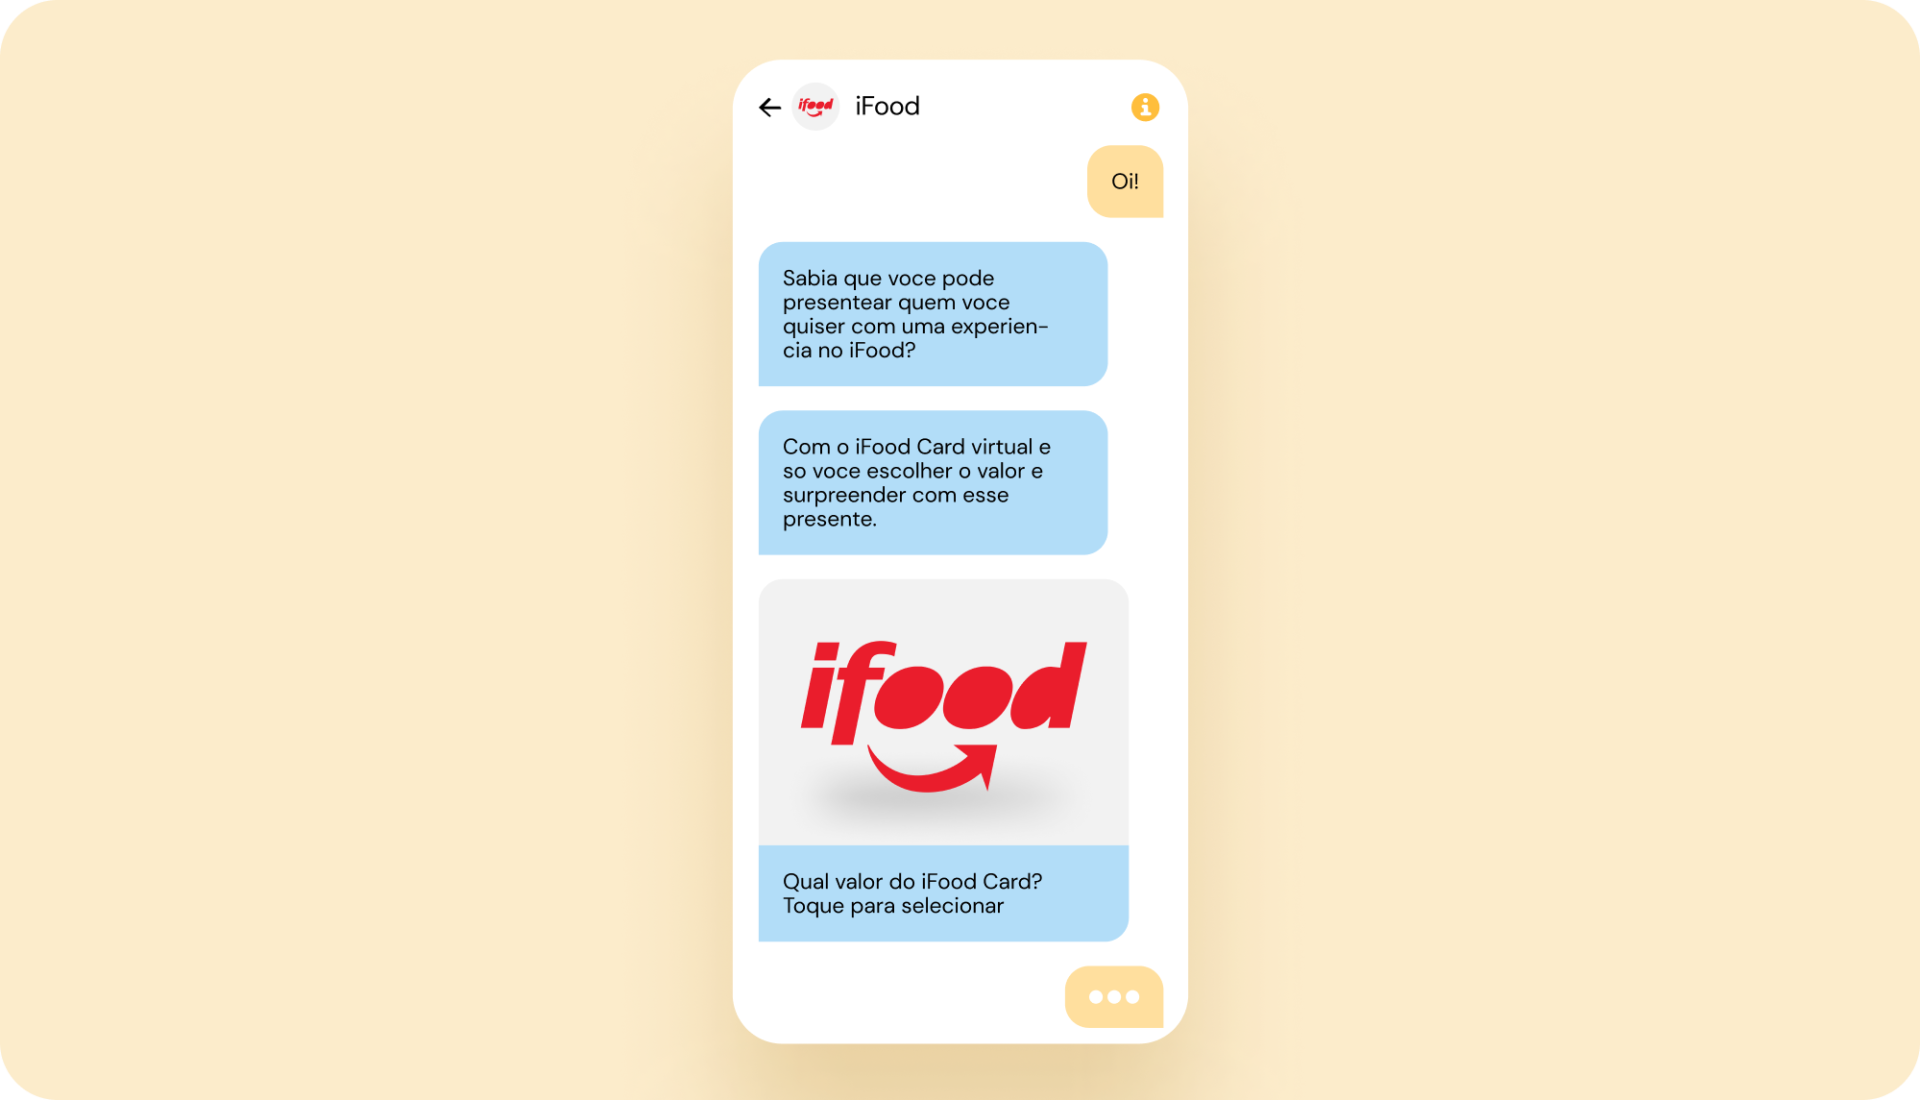 iFood using WhatsApp Business messaging to create a fully automated experience